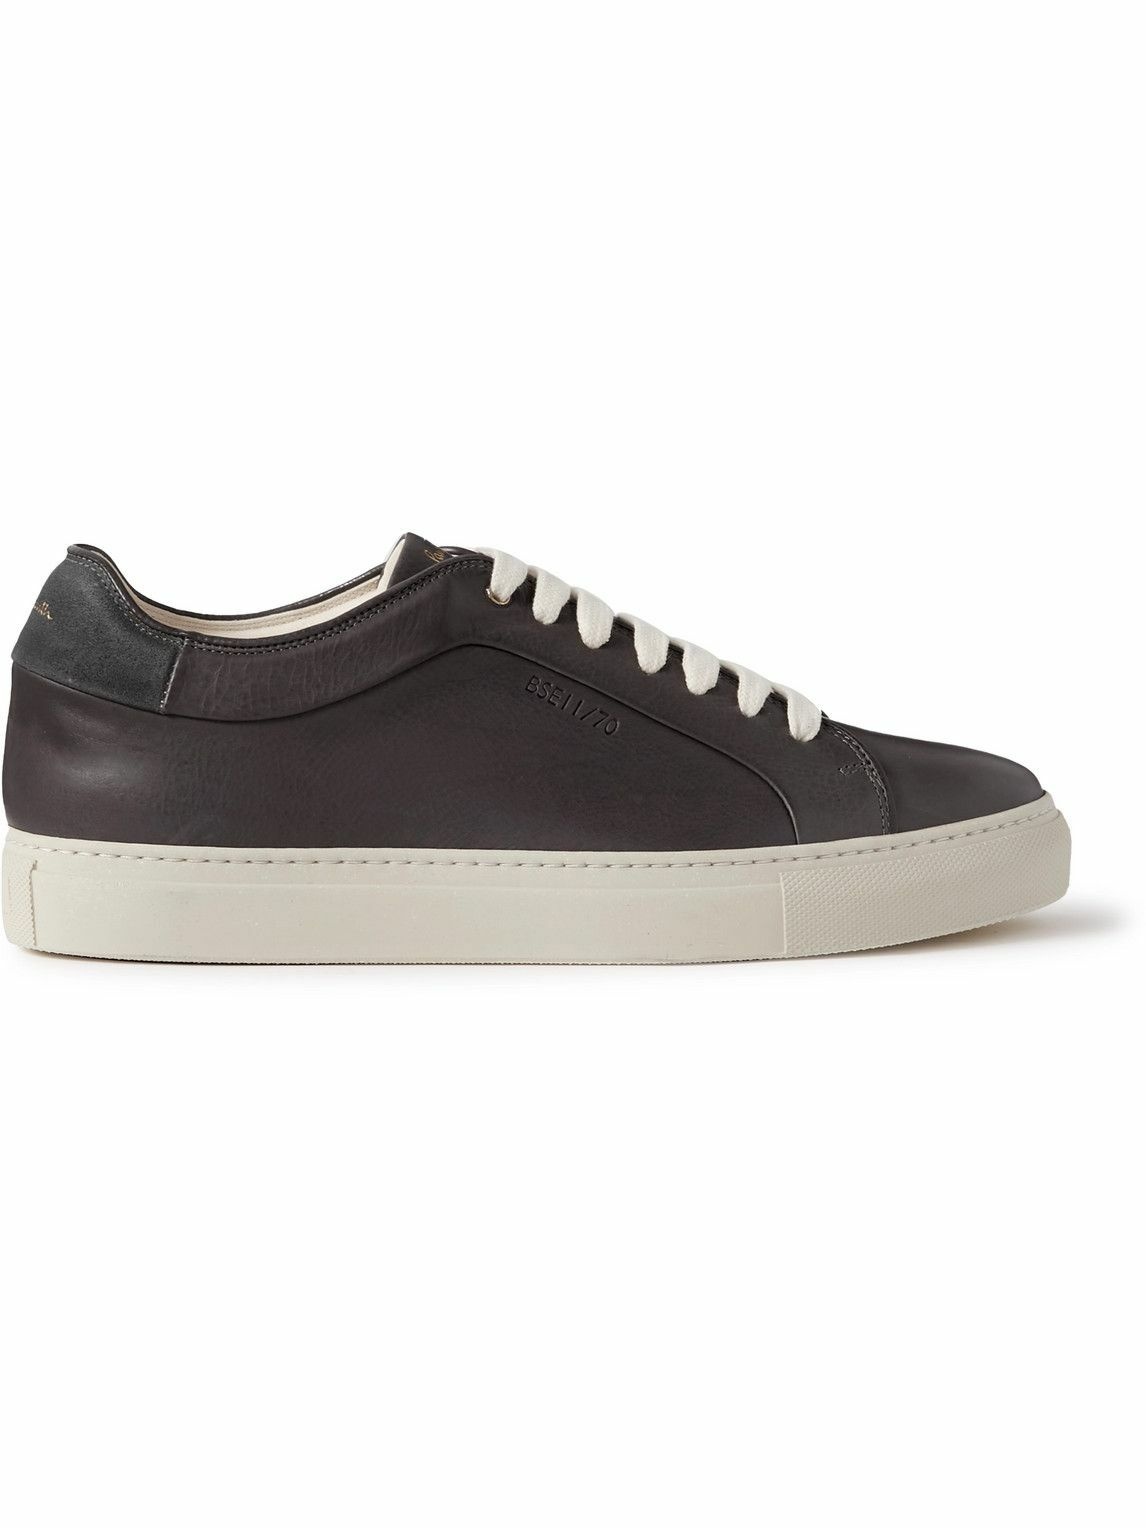 Paul Smith - Basso ECO Leather Sneakers - Gray Paul Smith